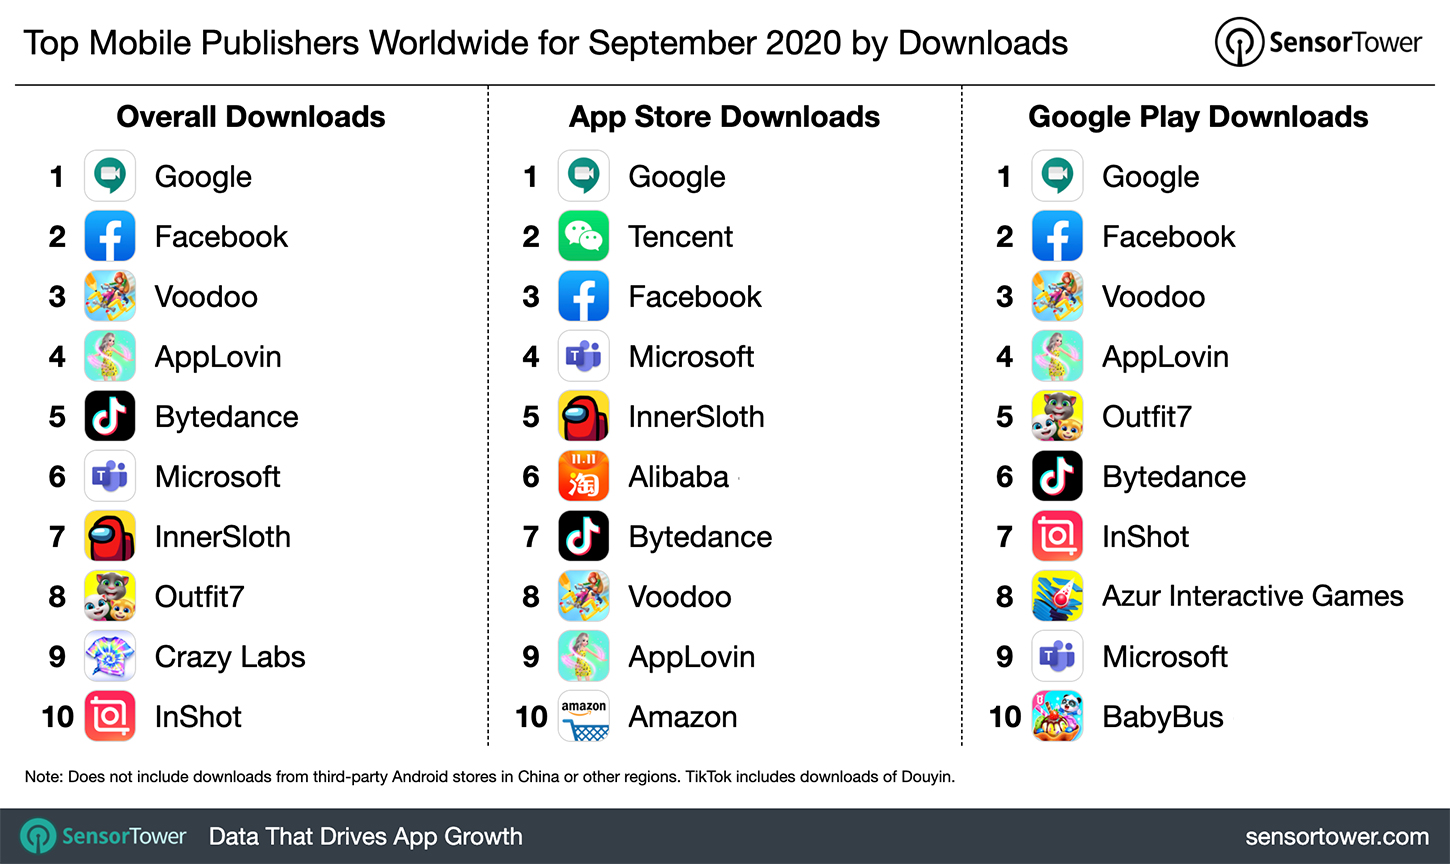 Top Mobile Publishers Worldwide for September 2020 by Downloads